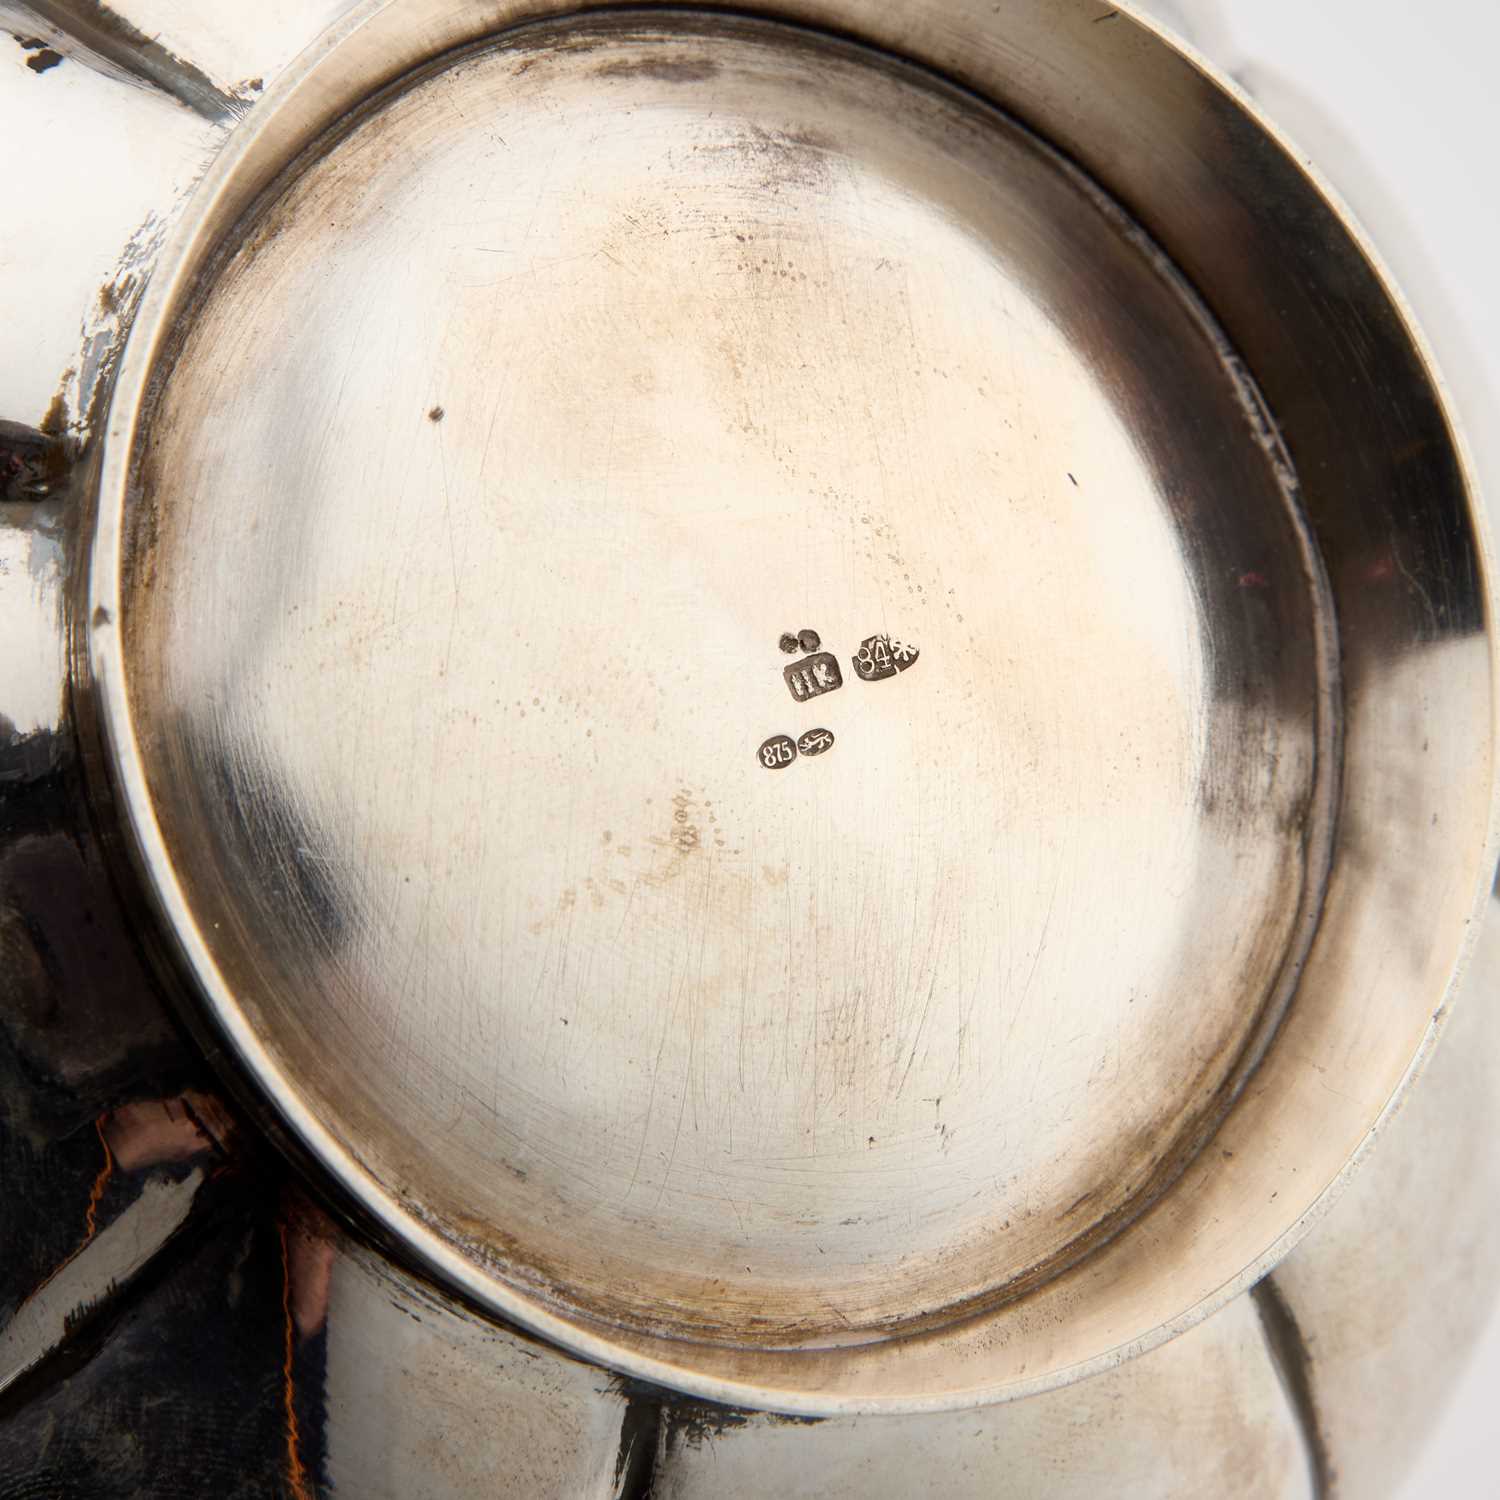 A LATE 19TH CENTURY RUSSIAN SILVER TEAPOT - Image 2 of 2